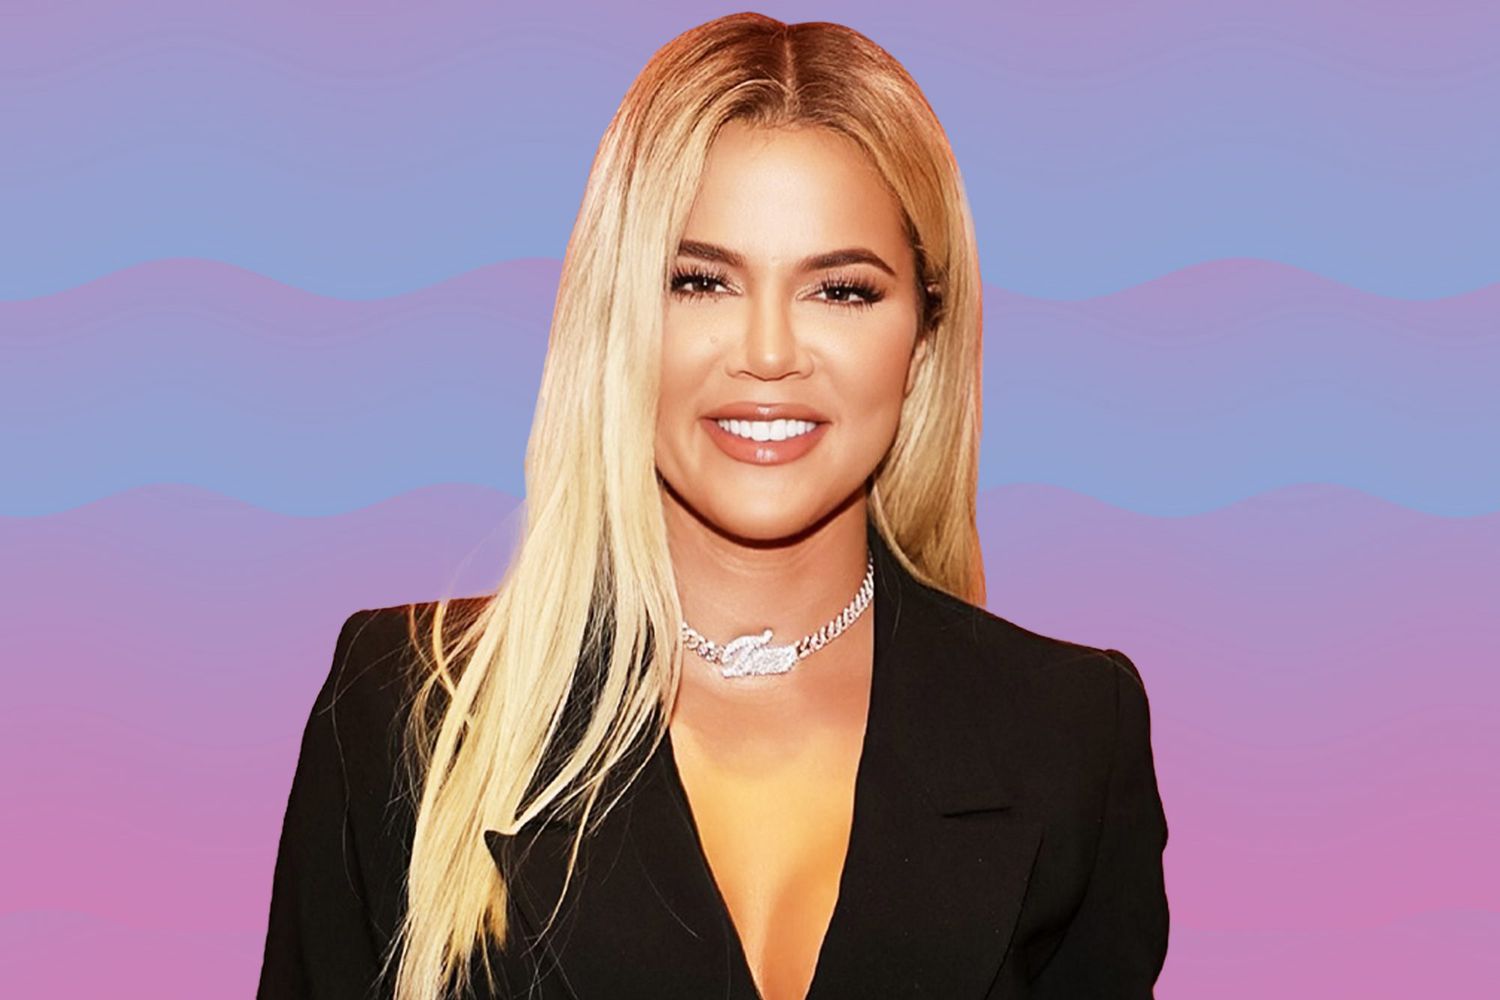 Khloe Kardashian Biography Height Weight Age Movies Husband Family Salary Net Worth Facts More